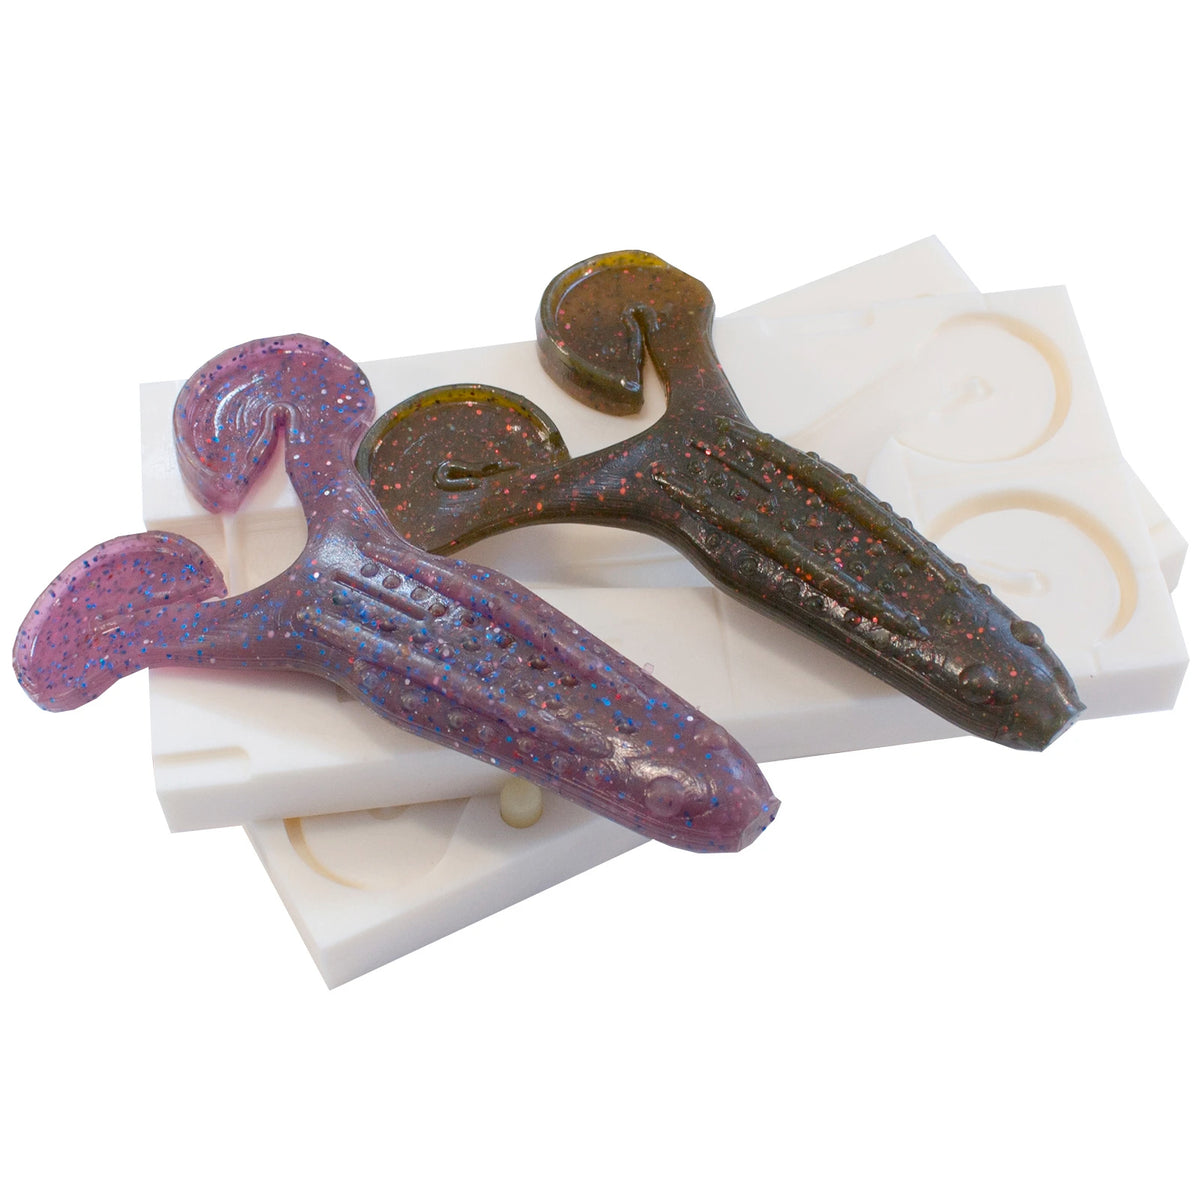 Soft Plastics Mold for 3.5 Inch frog toad type lure - 1 Cavity